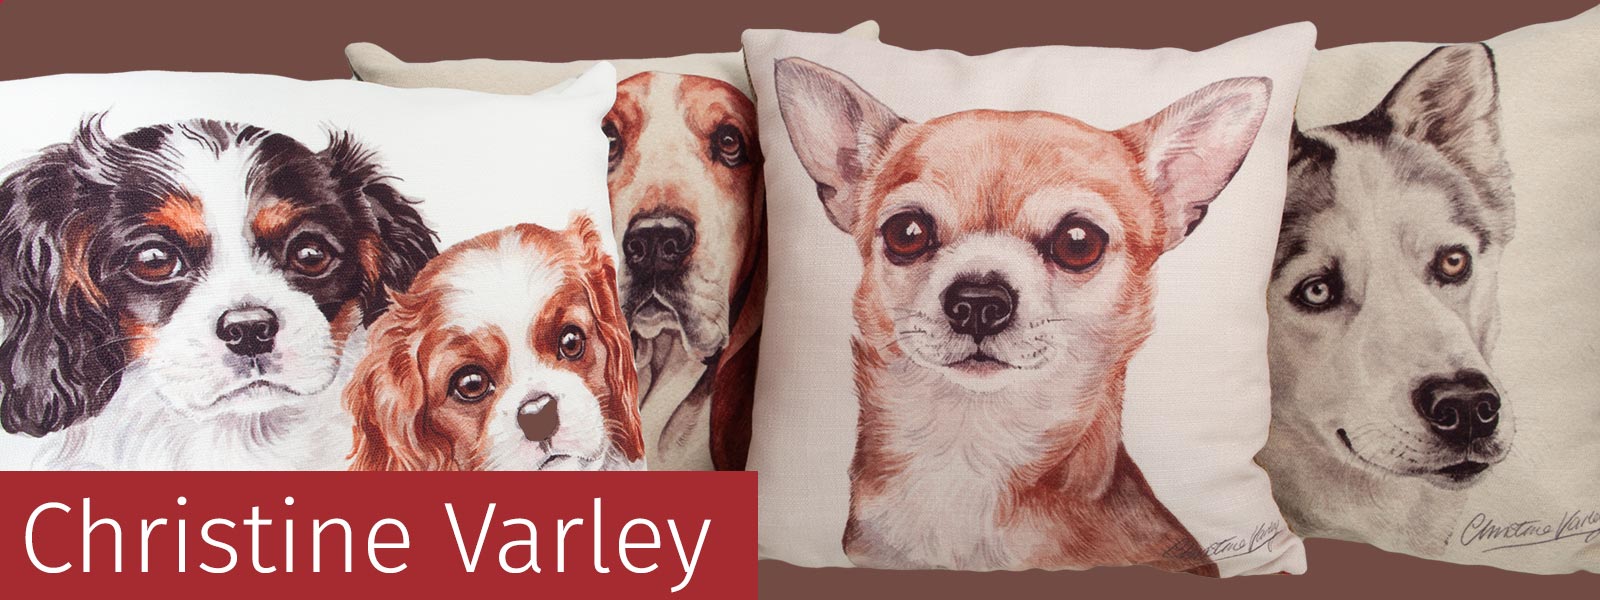 Christine Varley Luxury Dog Themed Cushions available from Dog Krazy Gifts